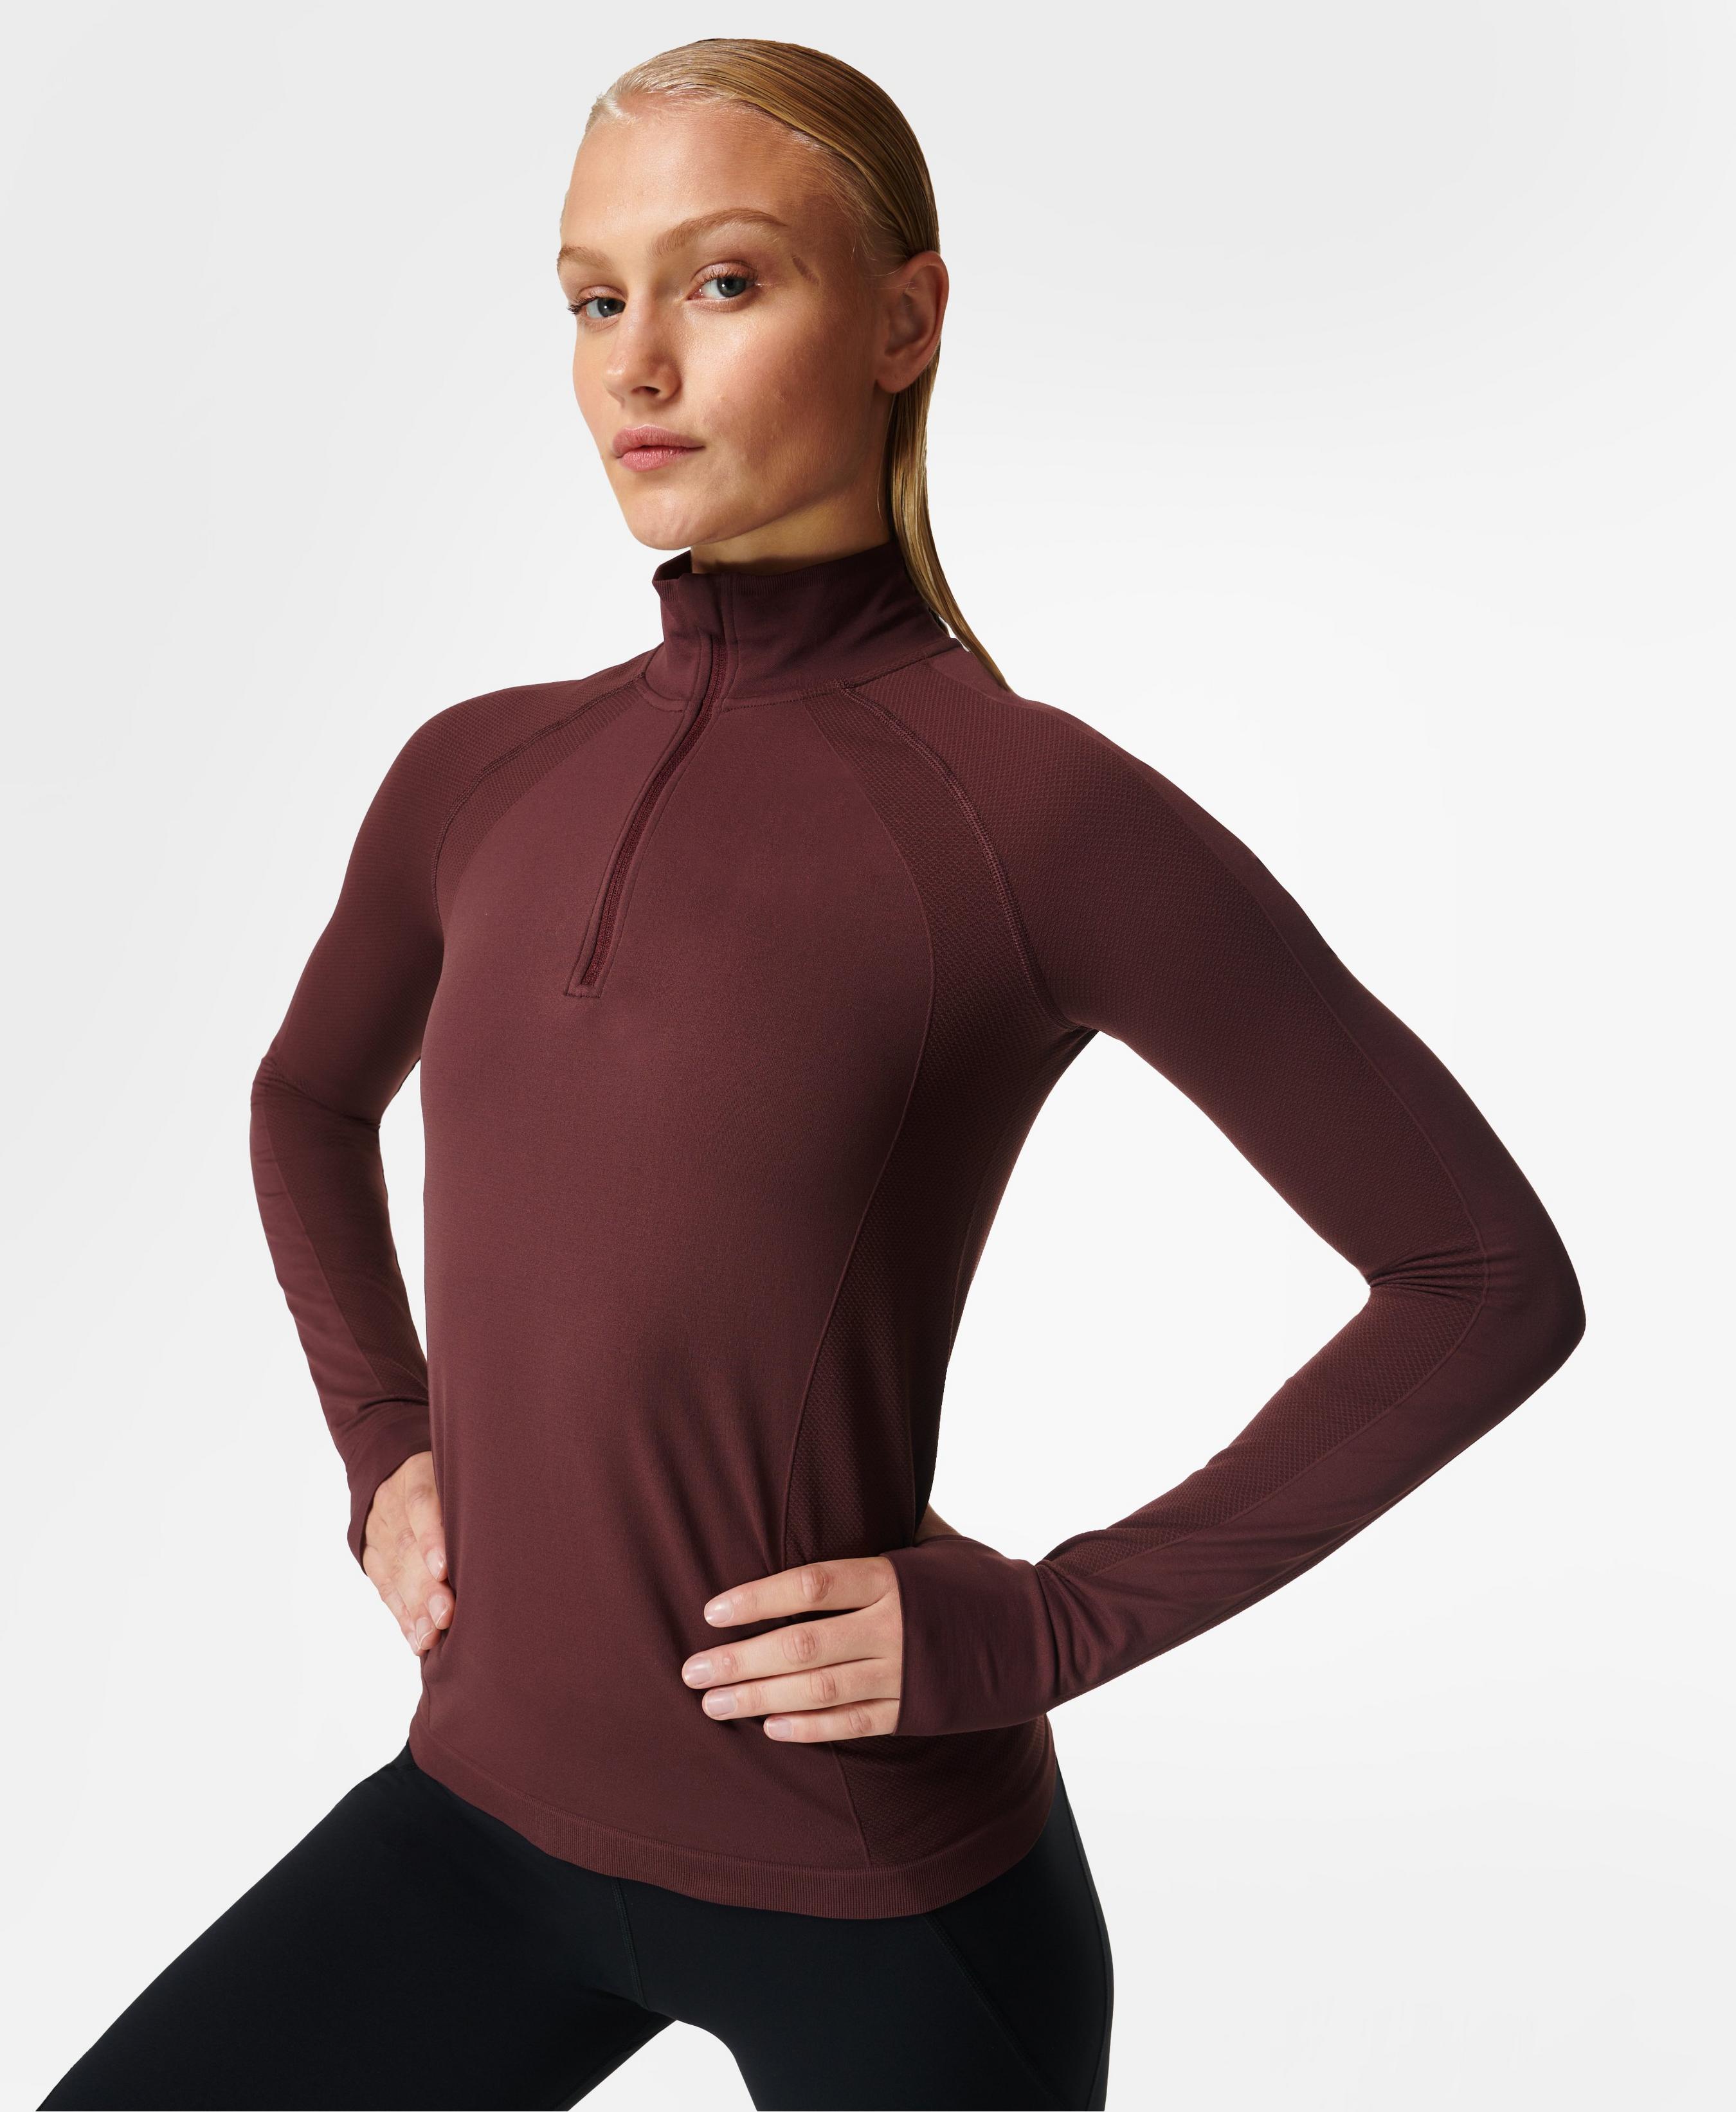 Sweaty Betty Athlete Seamless Half Zip Long Sleeve Top - Giacca in pile - Donna